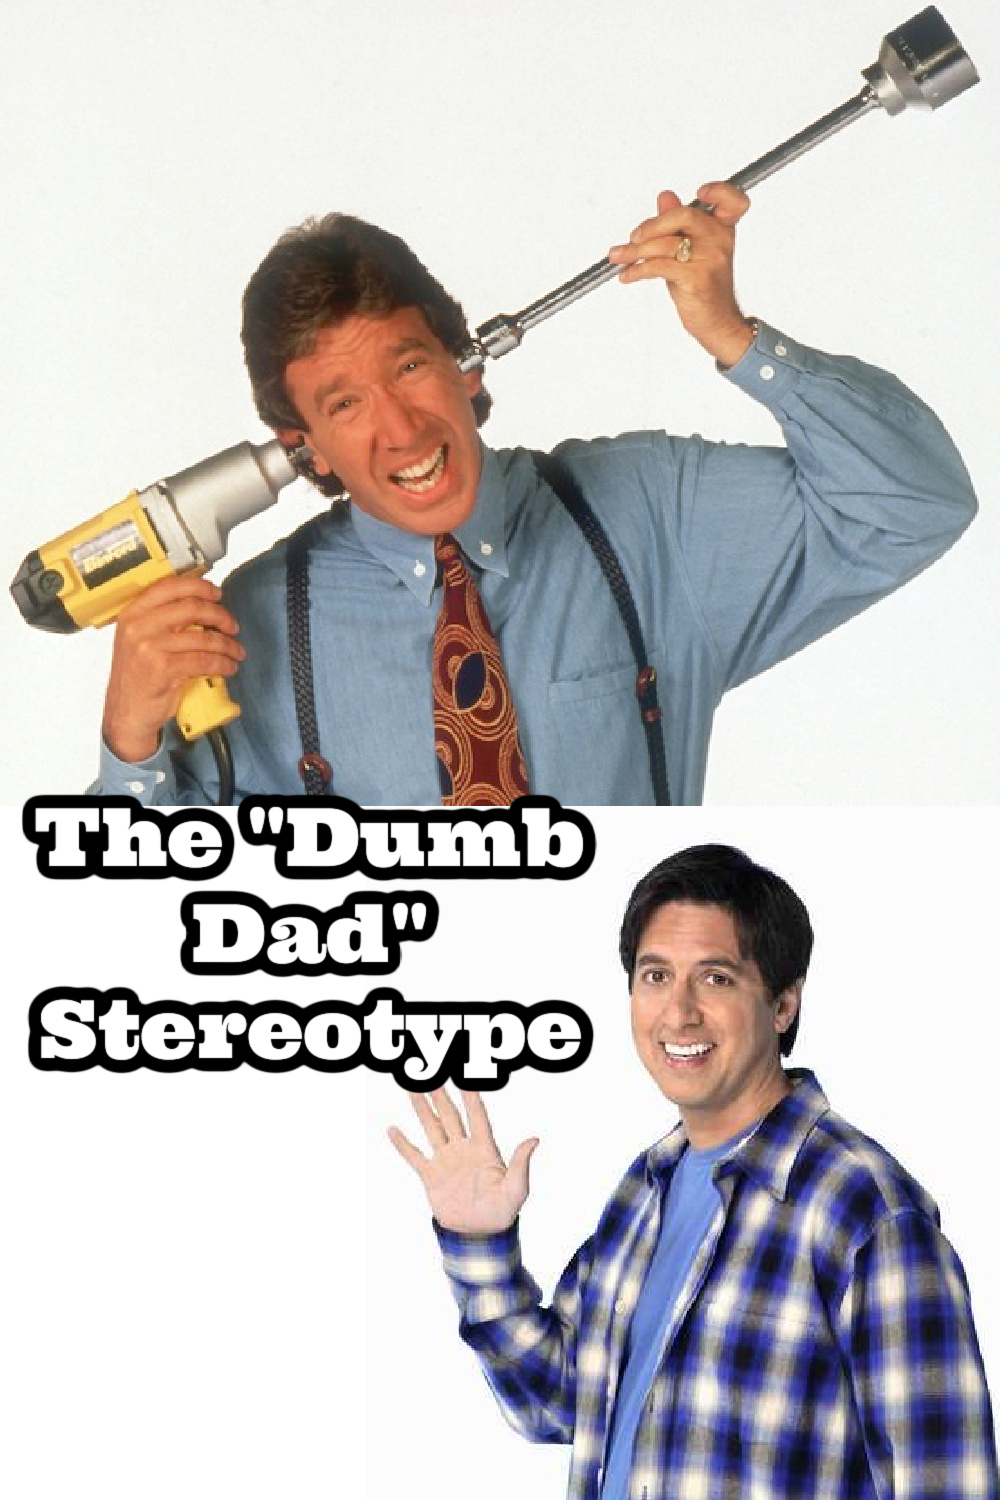 Masculine Stereotypes in Media | Sitcom “Dumb Dads”